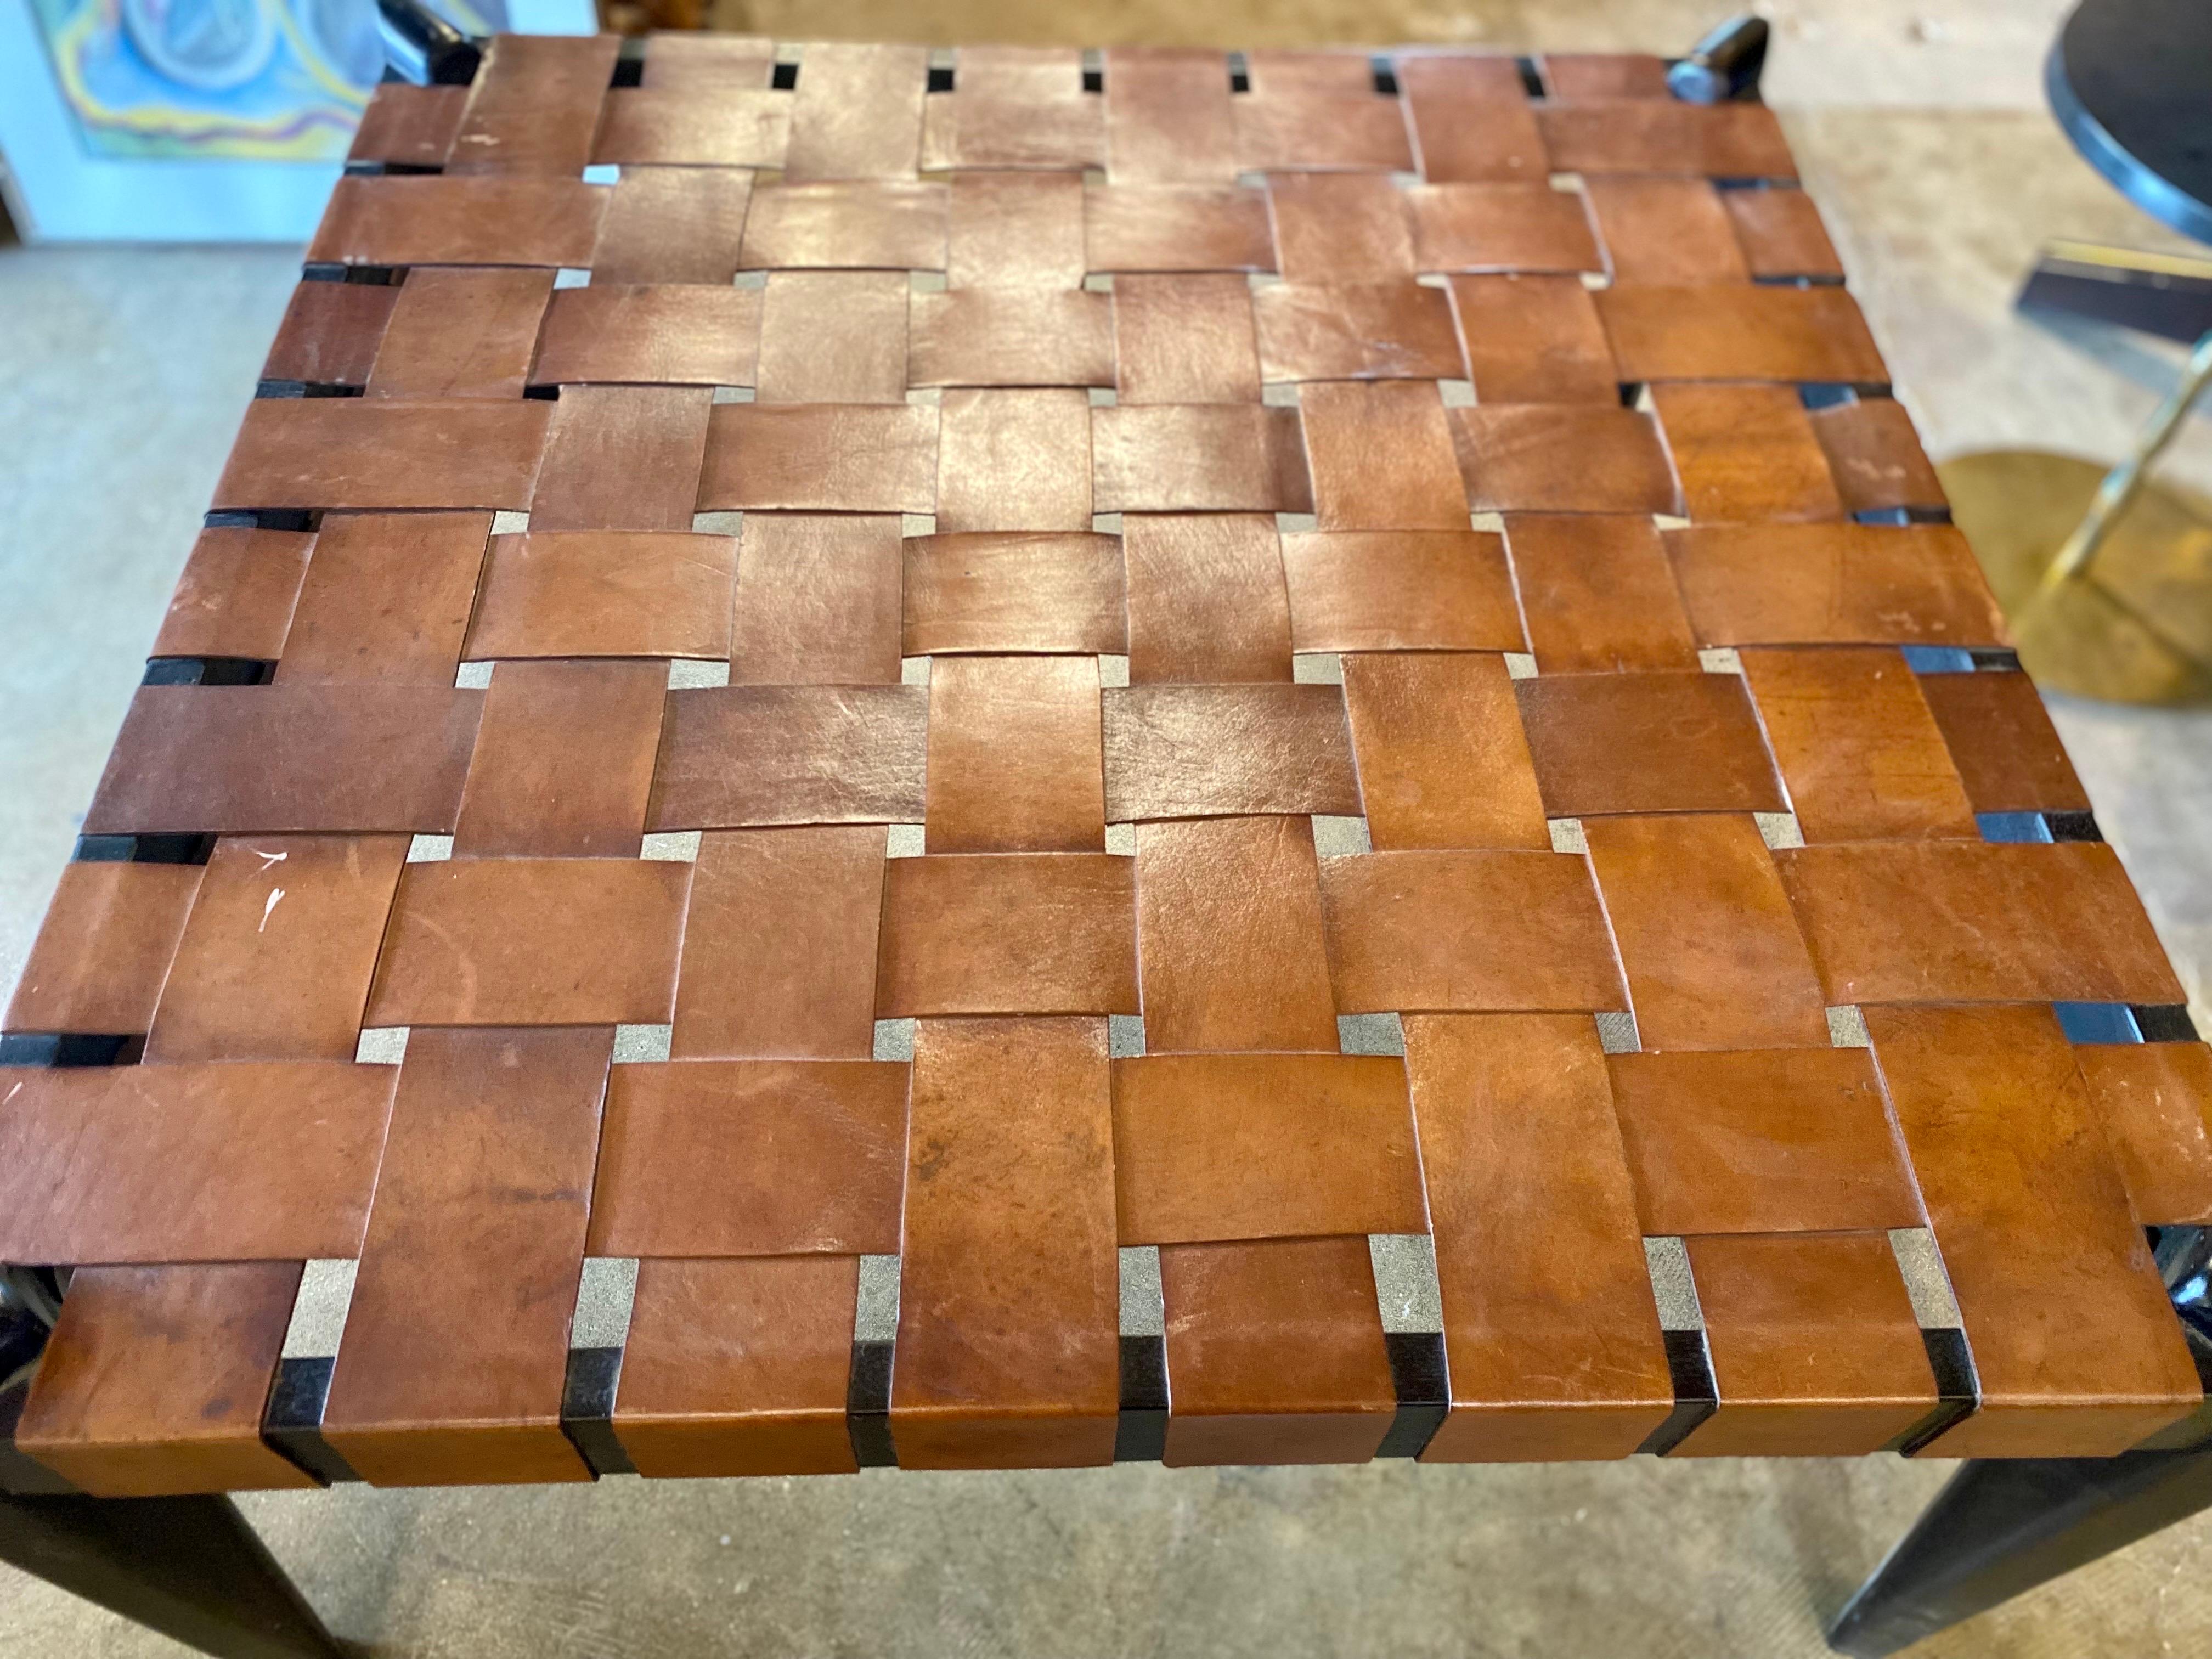 Mid-Century Modern Woven Leather Table in the Style of Edmond Spence im Zustand „Gut“ im Angebot in San Antonio, TX